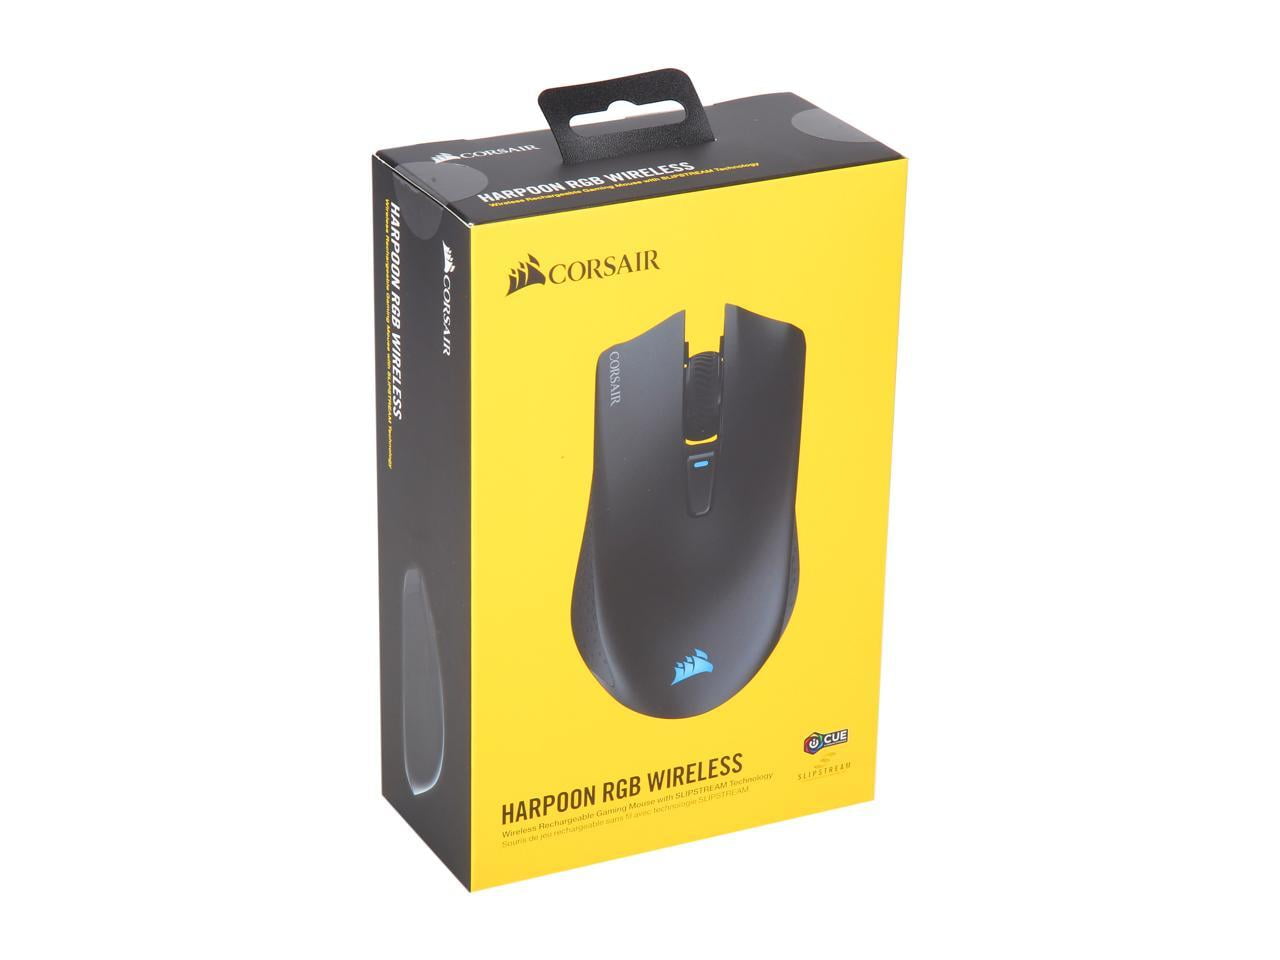 CORSAIR Harpoon RGB Wireless - Wireless Rechargeable Gaming Mouse - DPI Optical Sensor. SlipStream Wireless, Bluetooth or USB Wired Connectivity. Win Without Wires! -